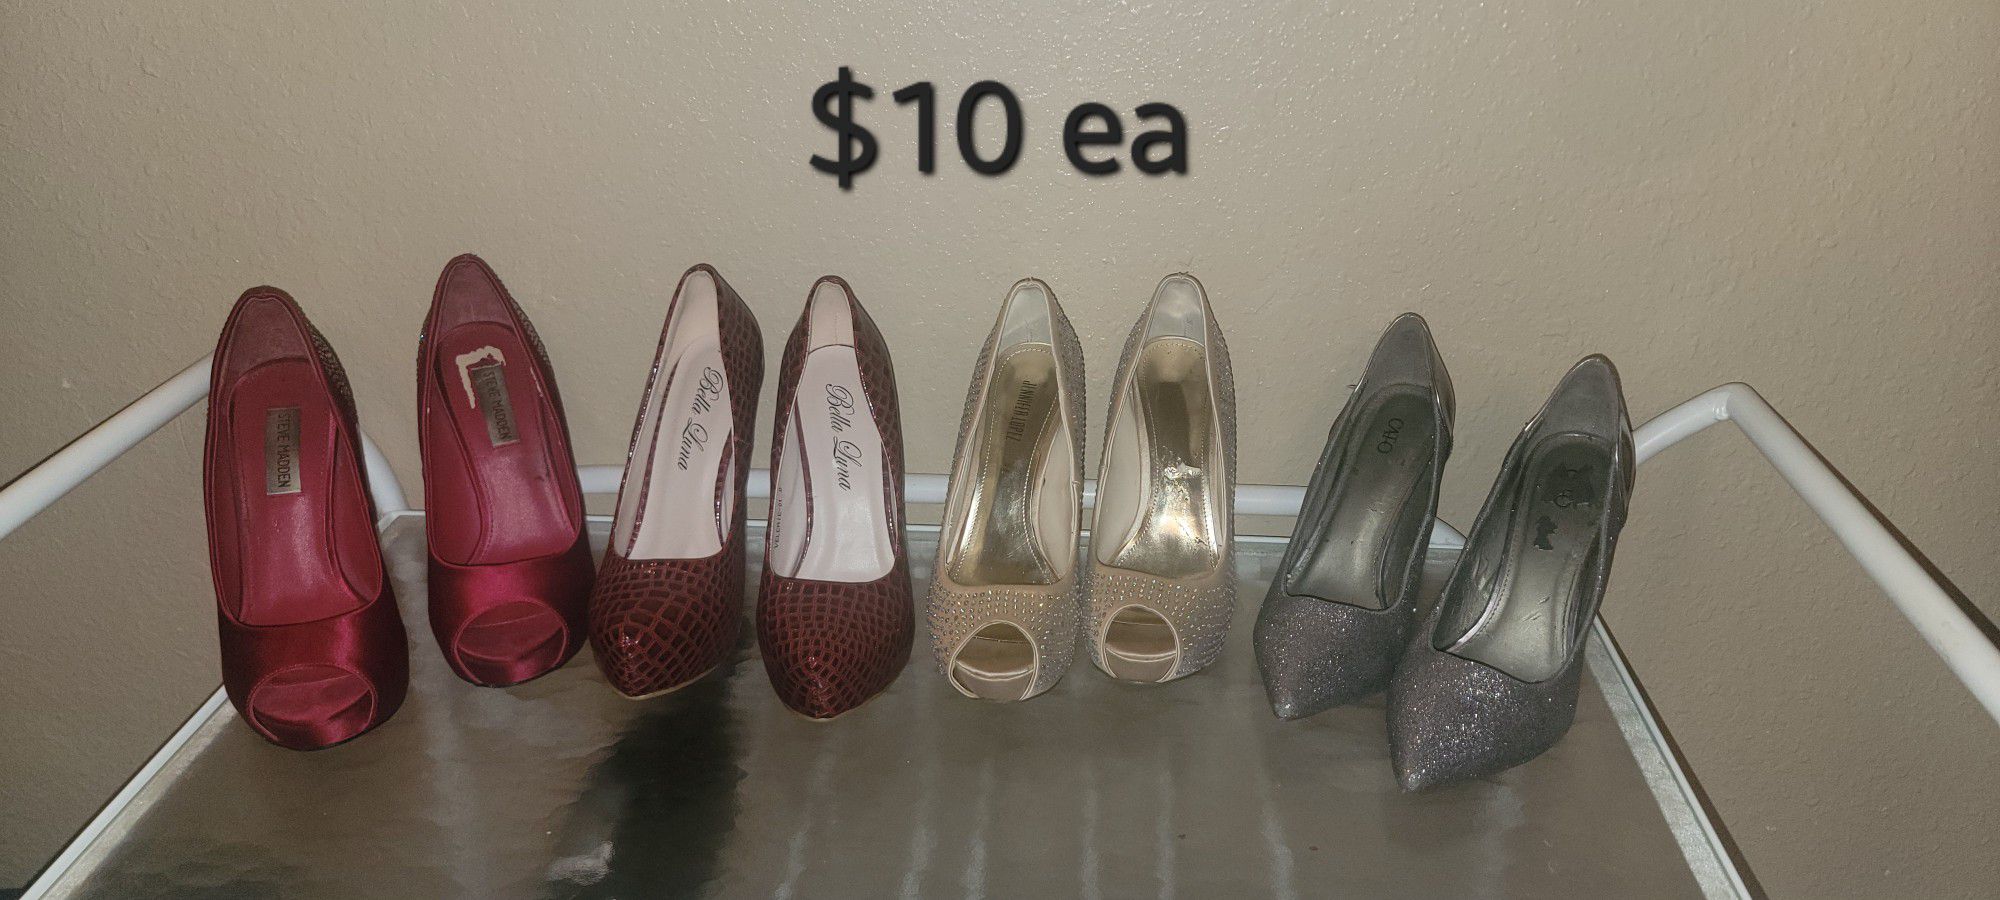 Clearance price $5 ea  High heels, pumps, dress shoes
... see photos for sizes.
Prom, wedding, quinceanera
Pick up in Harlingen near Walmart.